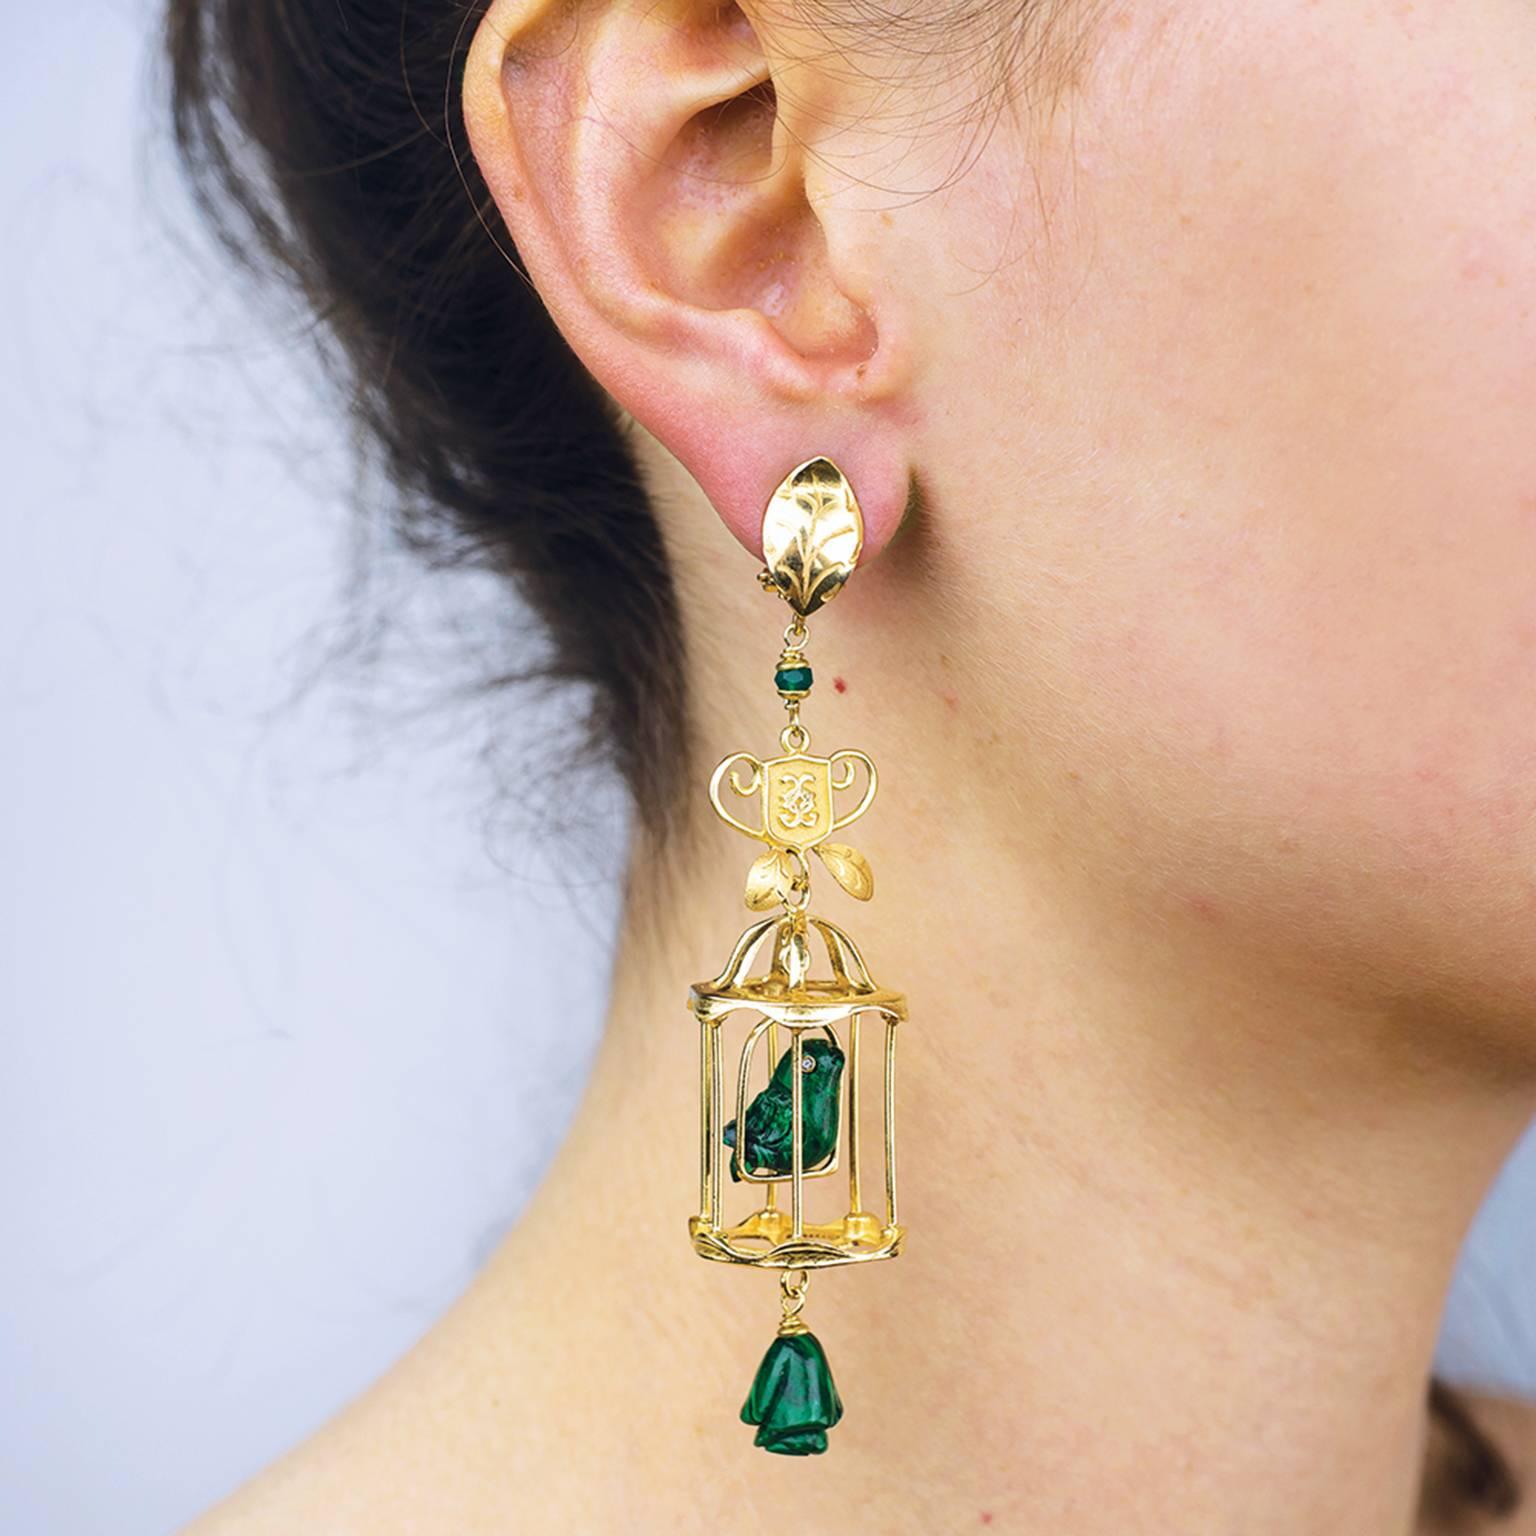 These lovebirds are the most charming VALENTINES gift! The earrings feature an open cage of 18 karat yellow vermeil sheltering delicate lovebirds sculpted from deep green malachite. Singing happily into your ear, the birds’ eyes twinkle with Top